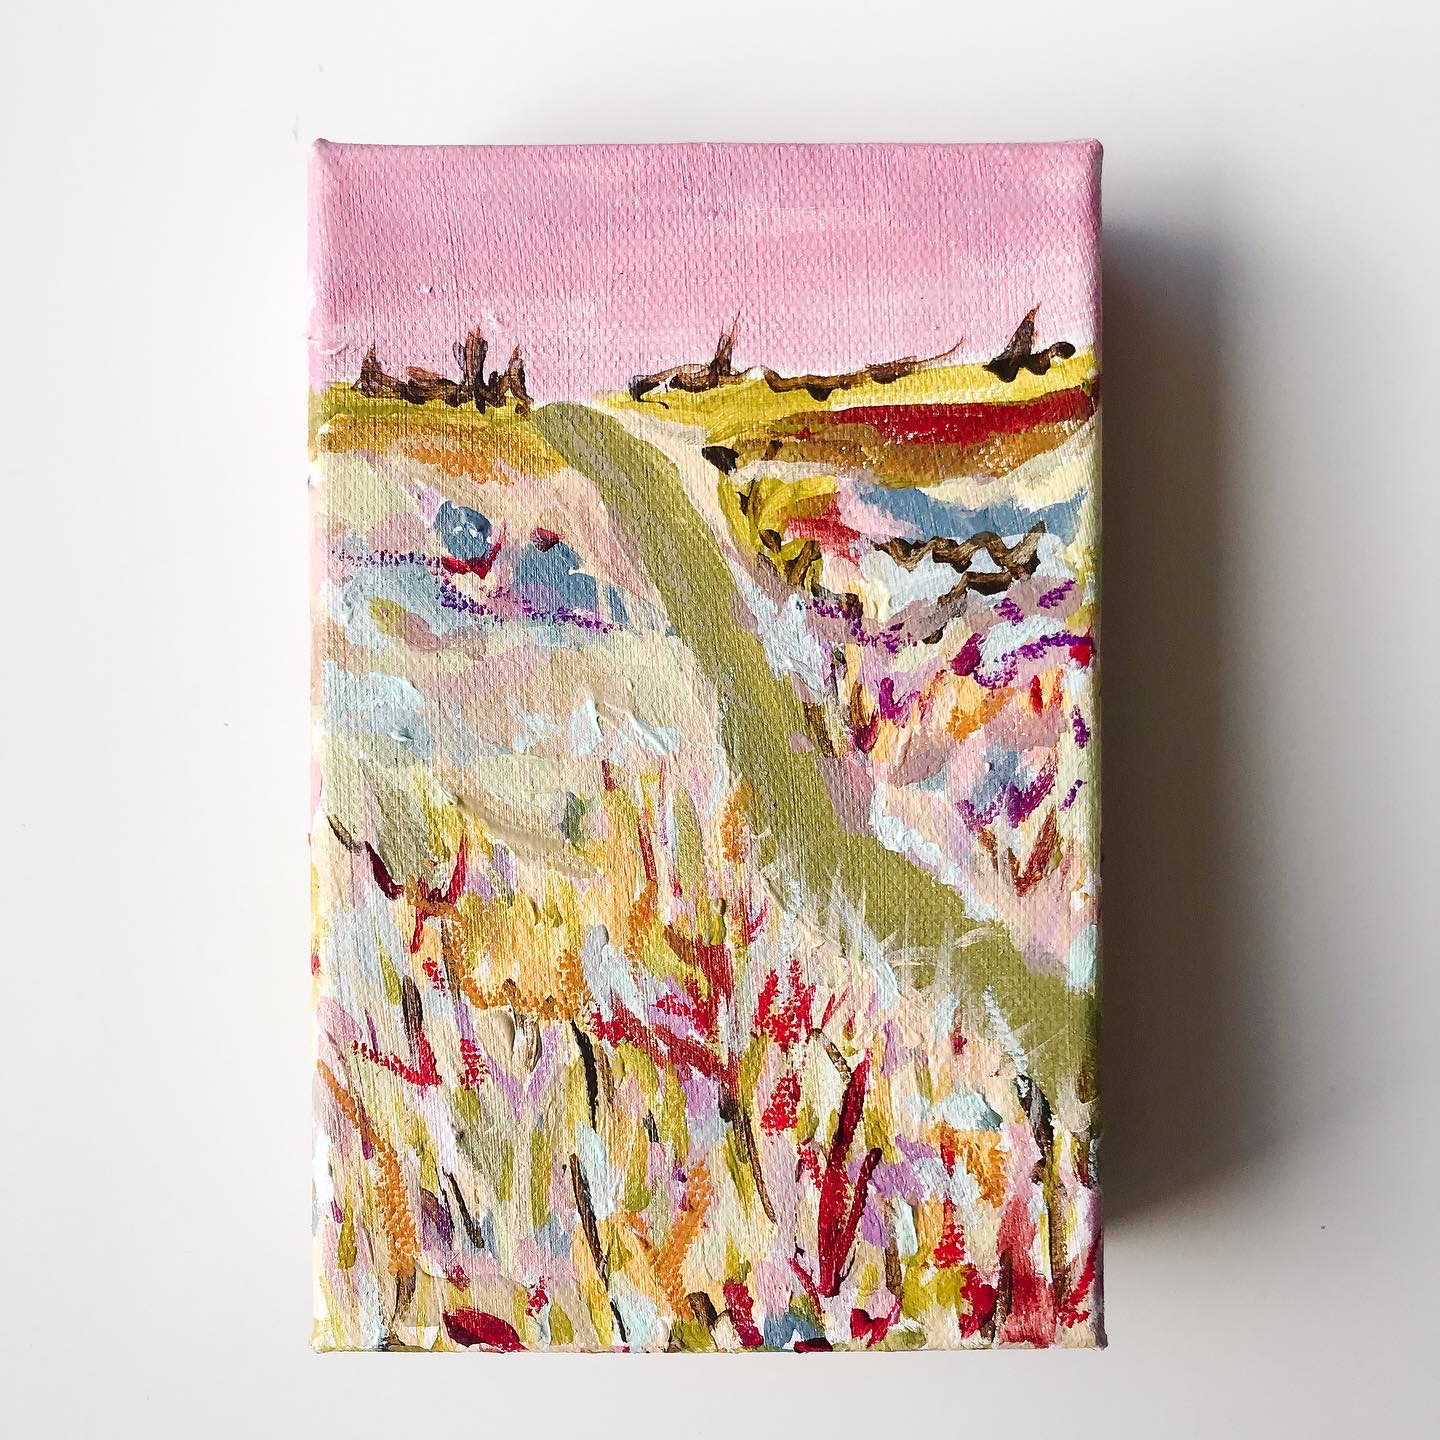 Mixed Media Landscape Painting on Canvas 